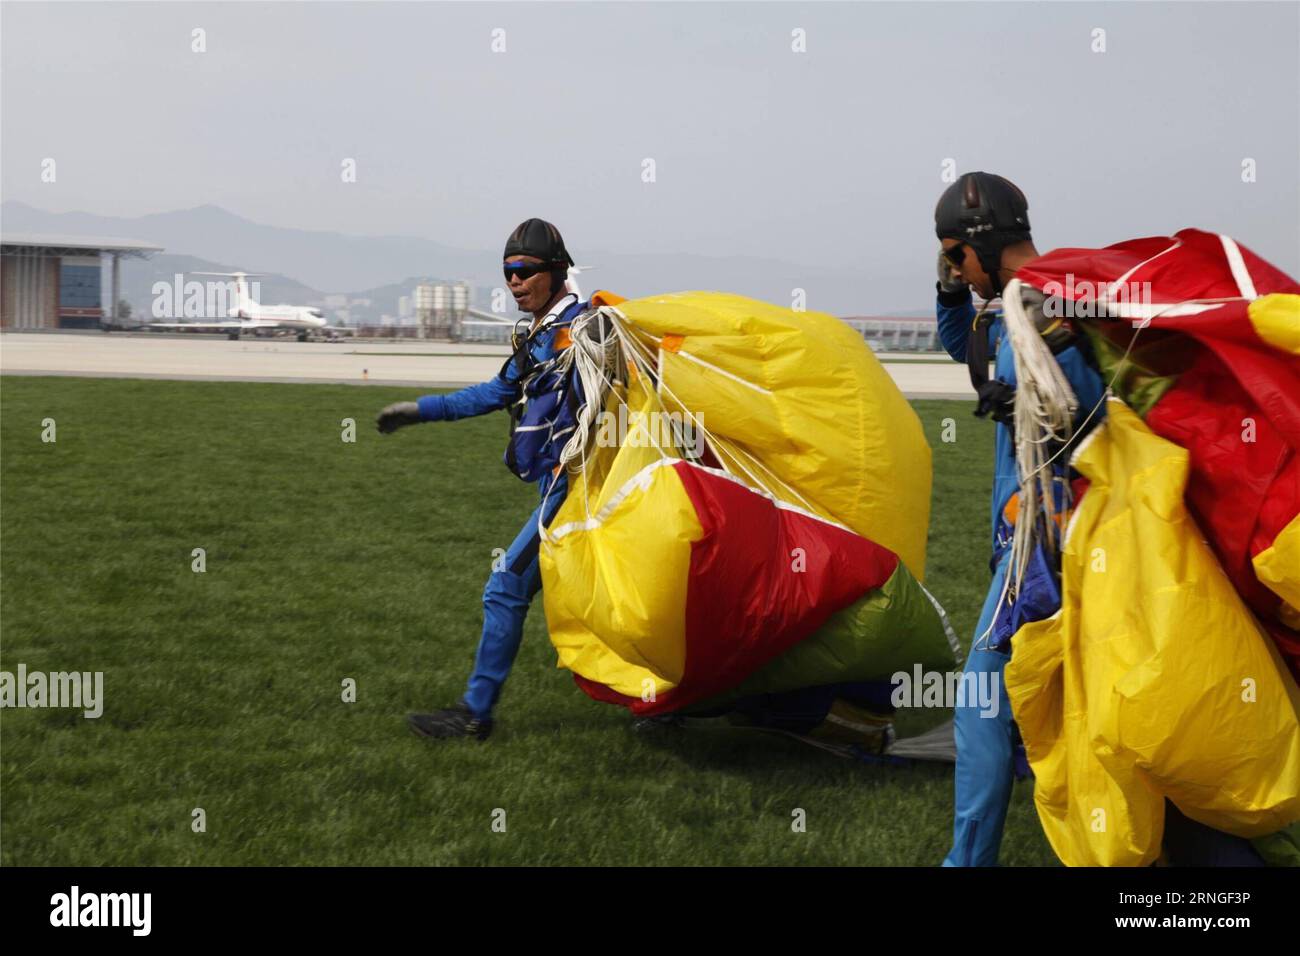 (160925) -- PYONGYANG, Sept. 25, 2016 -- Parachutists land after performance during an international air show in Wonsan, the Democratic People s Republic of Korea (DPRK), on Sept. 25, 2016, the second day of the international air show. The Wonsan International Friendship Air Festival, the first of its kind in the DPRK, runs from Saturday through Sunday at Kalma International Airport, which was redesigned and reconstructed from a military airfield to promote tourism. ) (cl) DPRK-WONSAN-INTERNATIONAL AIR SHOW ZhuxLongchuan PUBLICATIONxNOTxINxCHN   Pyongyang Sept 25 2016 parachutistsperson Parach Stock Photo